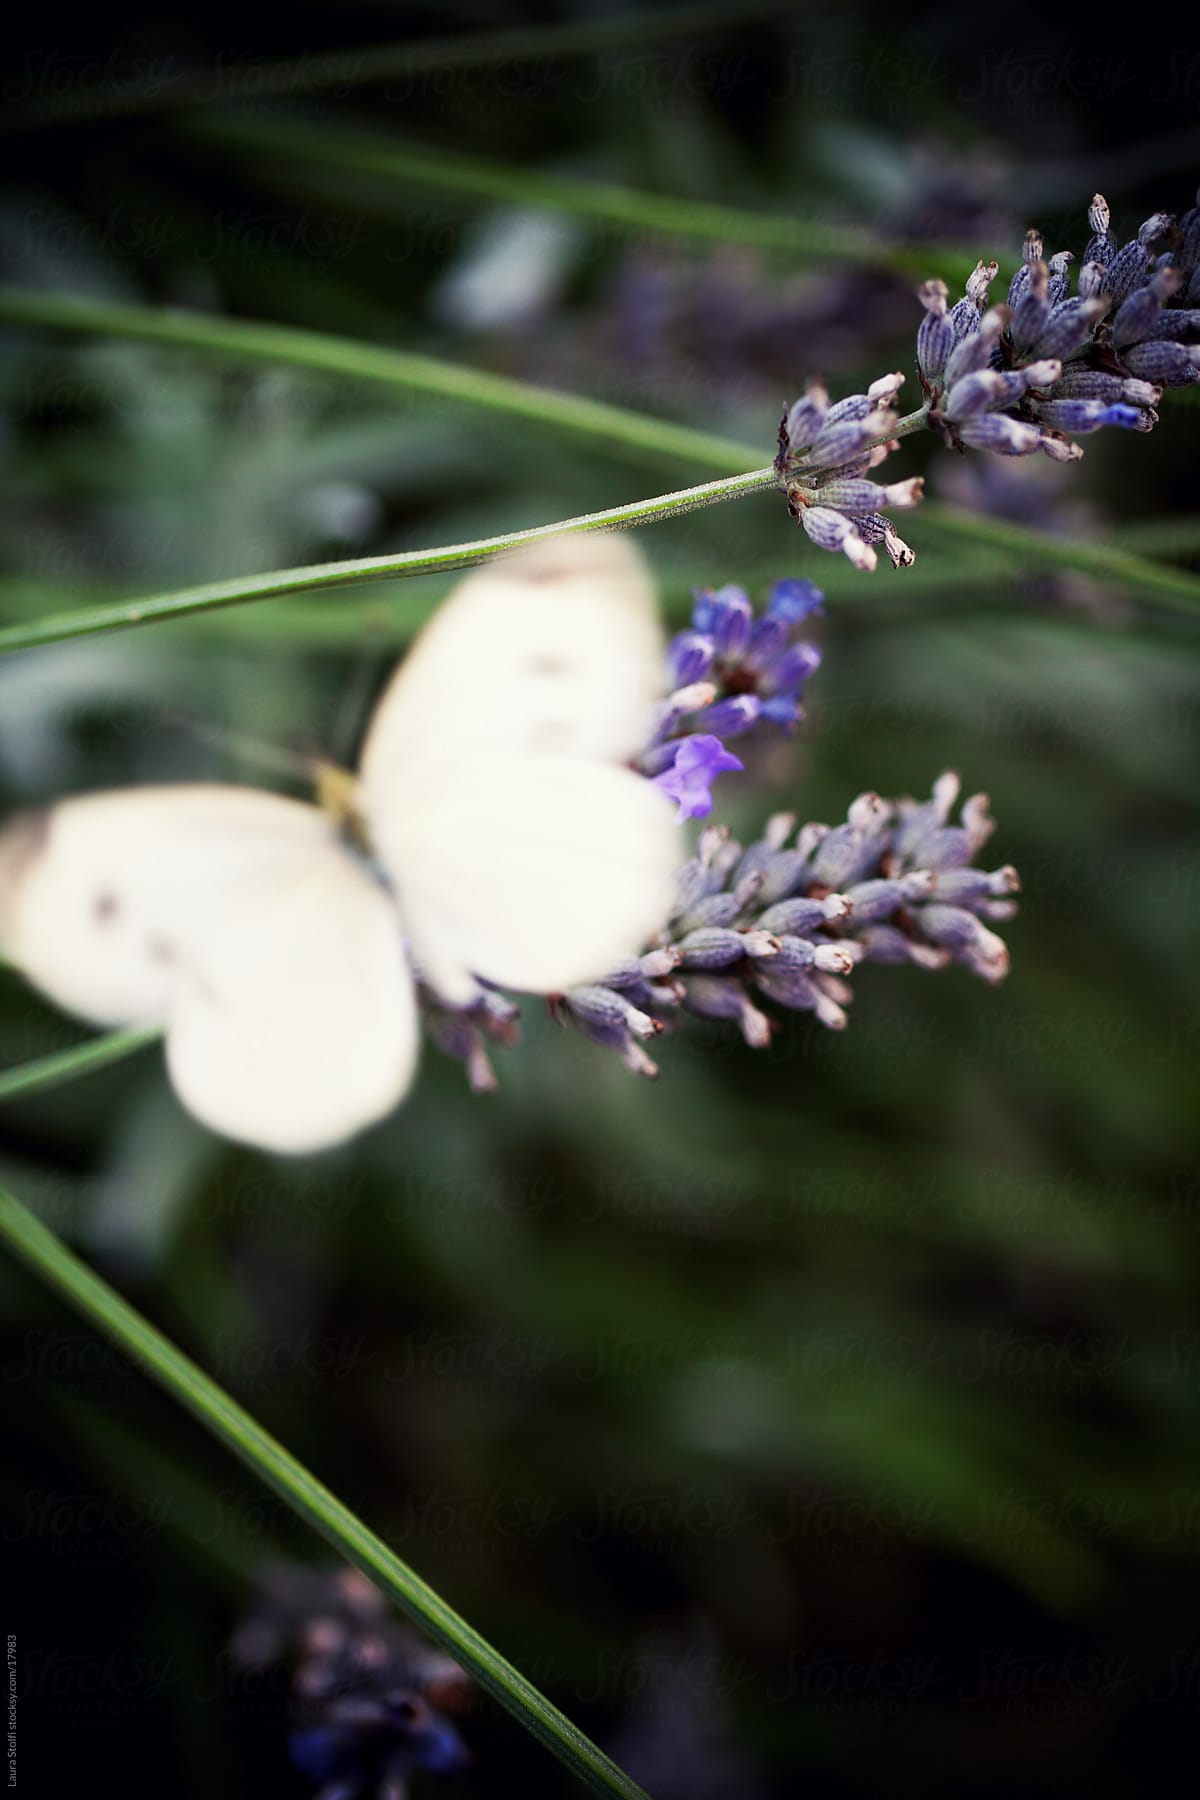 Blurry white butterfly behind lavender flowers